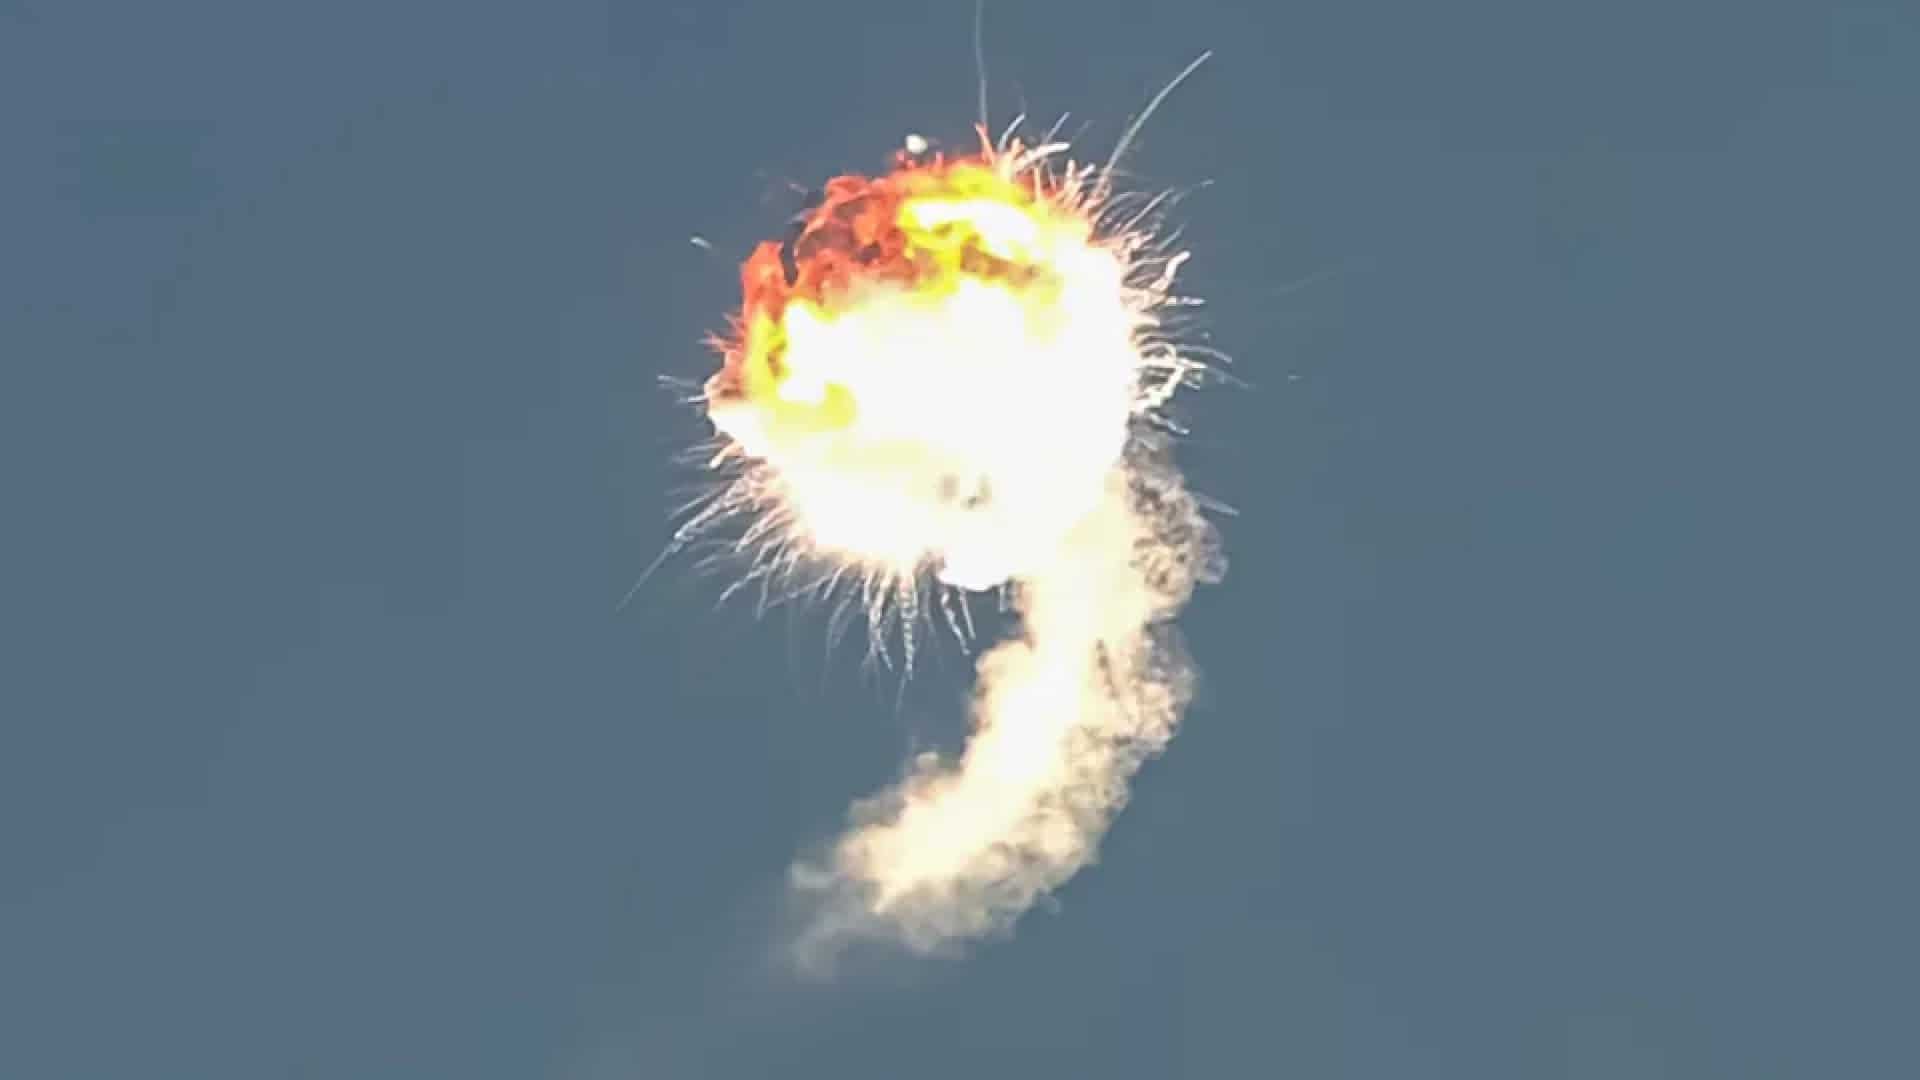 Firefly Aerospace’s Rocket Explodes Minutes After Launch